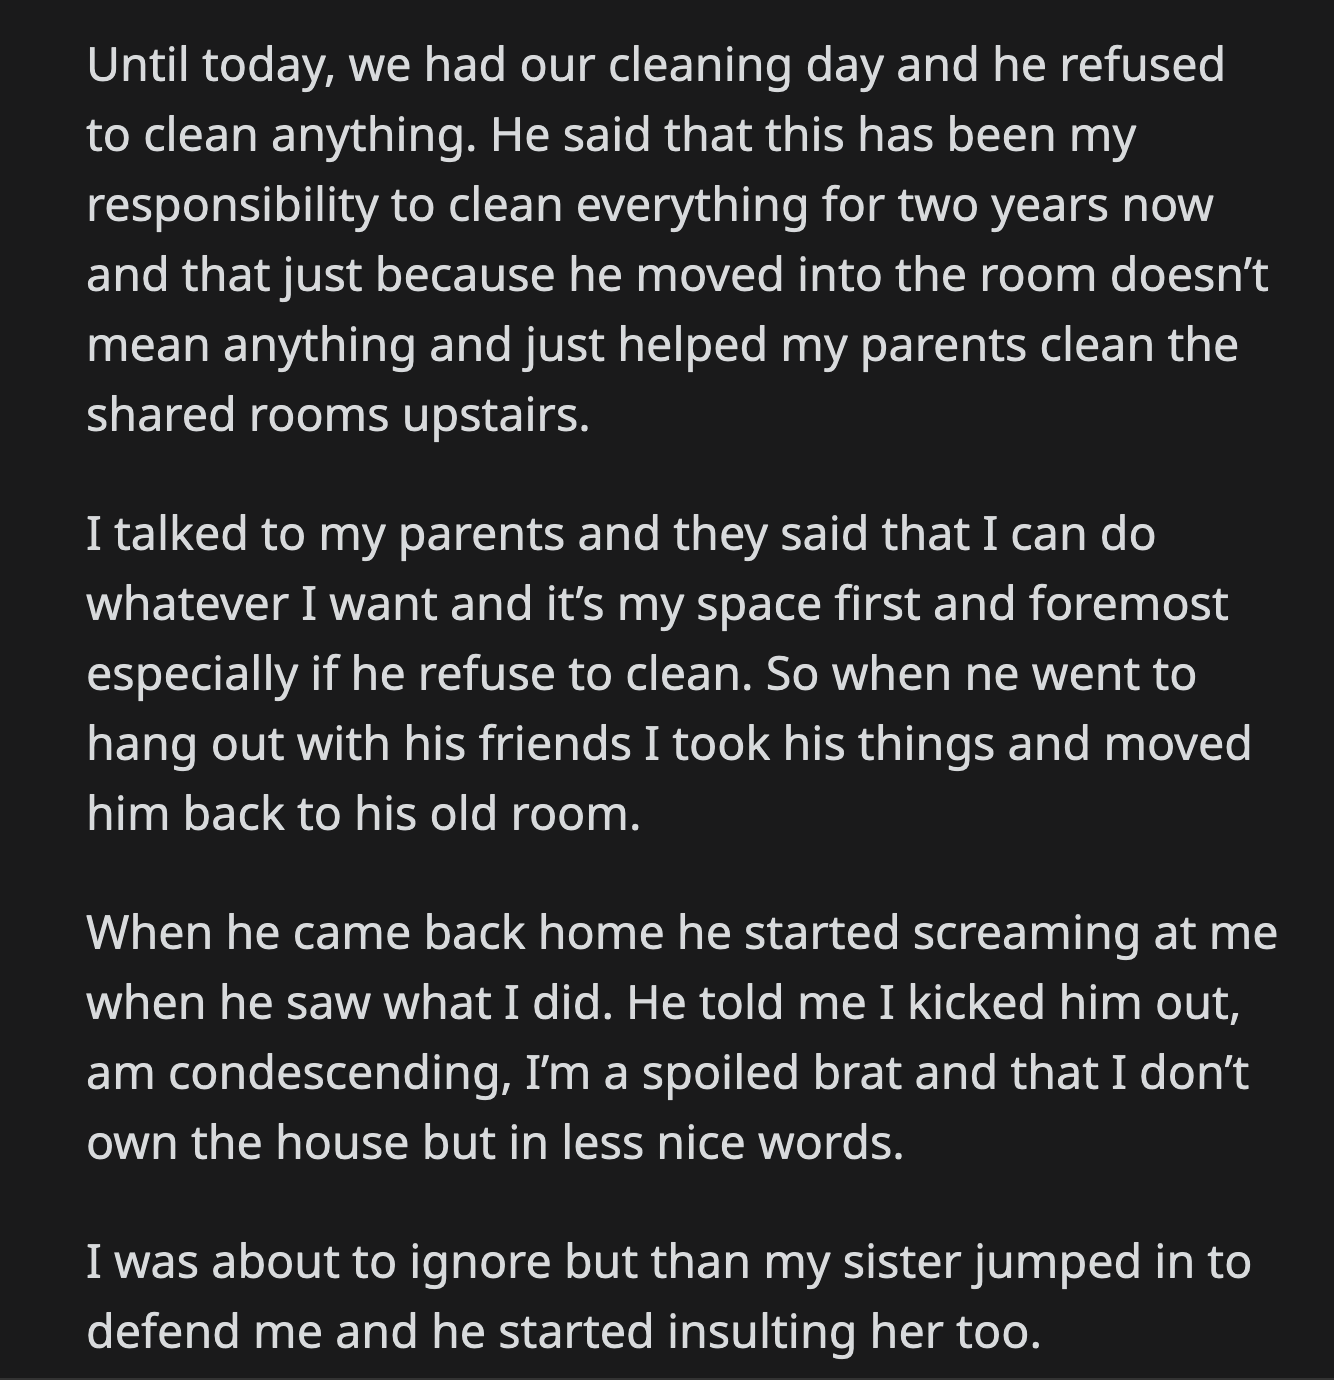 He yelled at OP when he realized what happened. He accused him of being condescending and a spoiled brat. OP would have ignored his brother's tantrums, but he also insulted their sister when she defended OP.